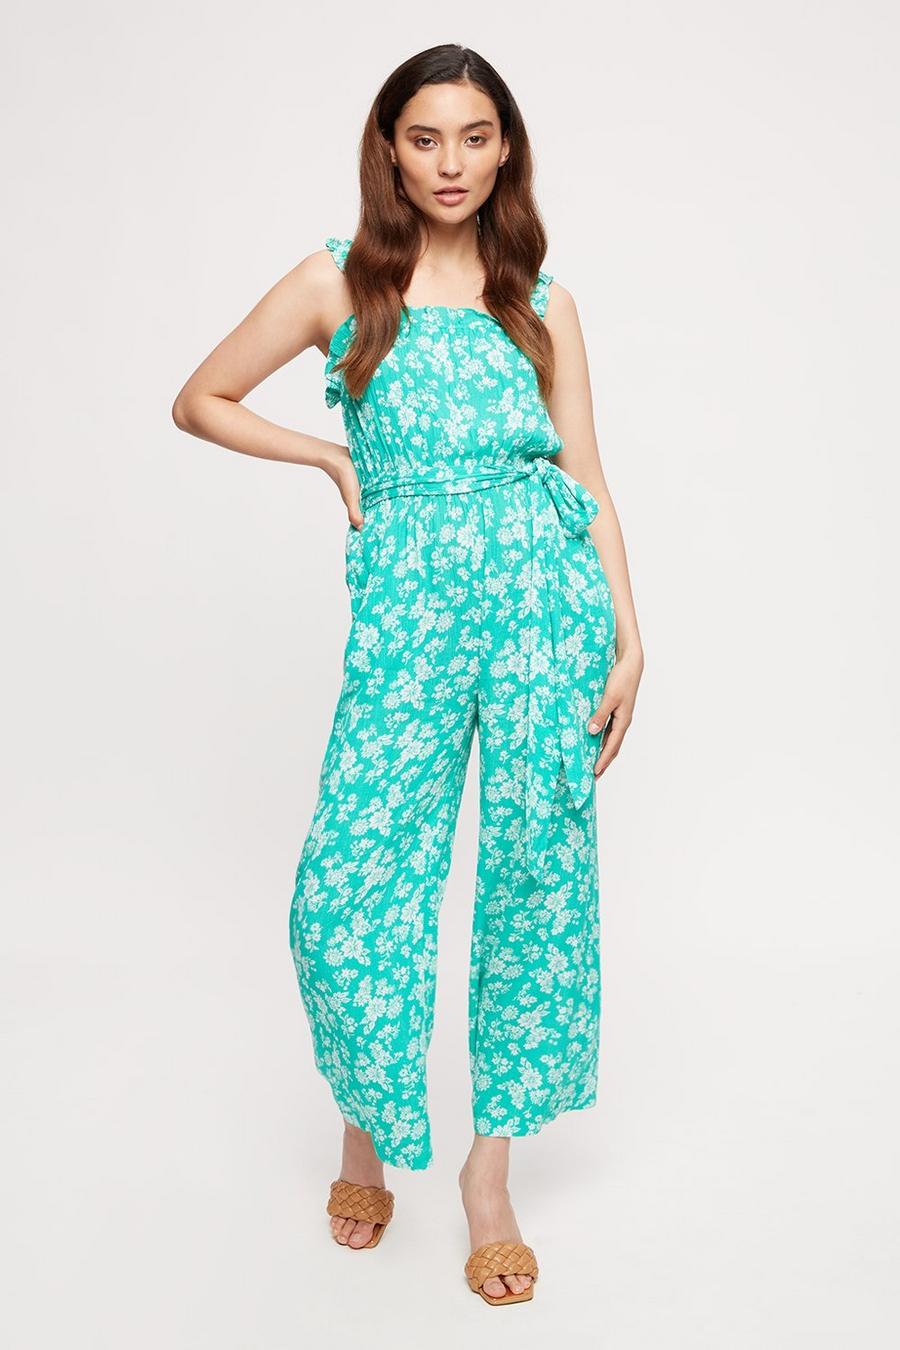 Petite Green And White Floral Jumpsuit